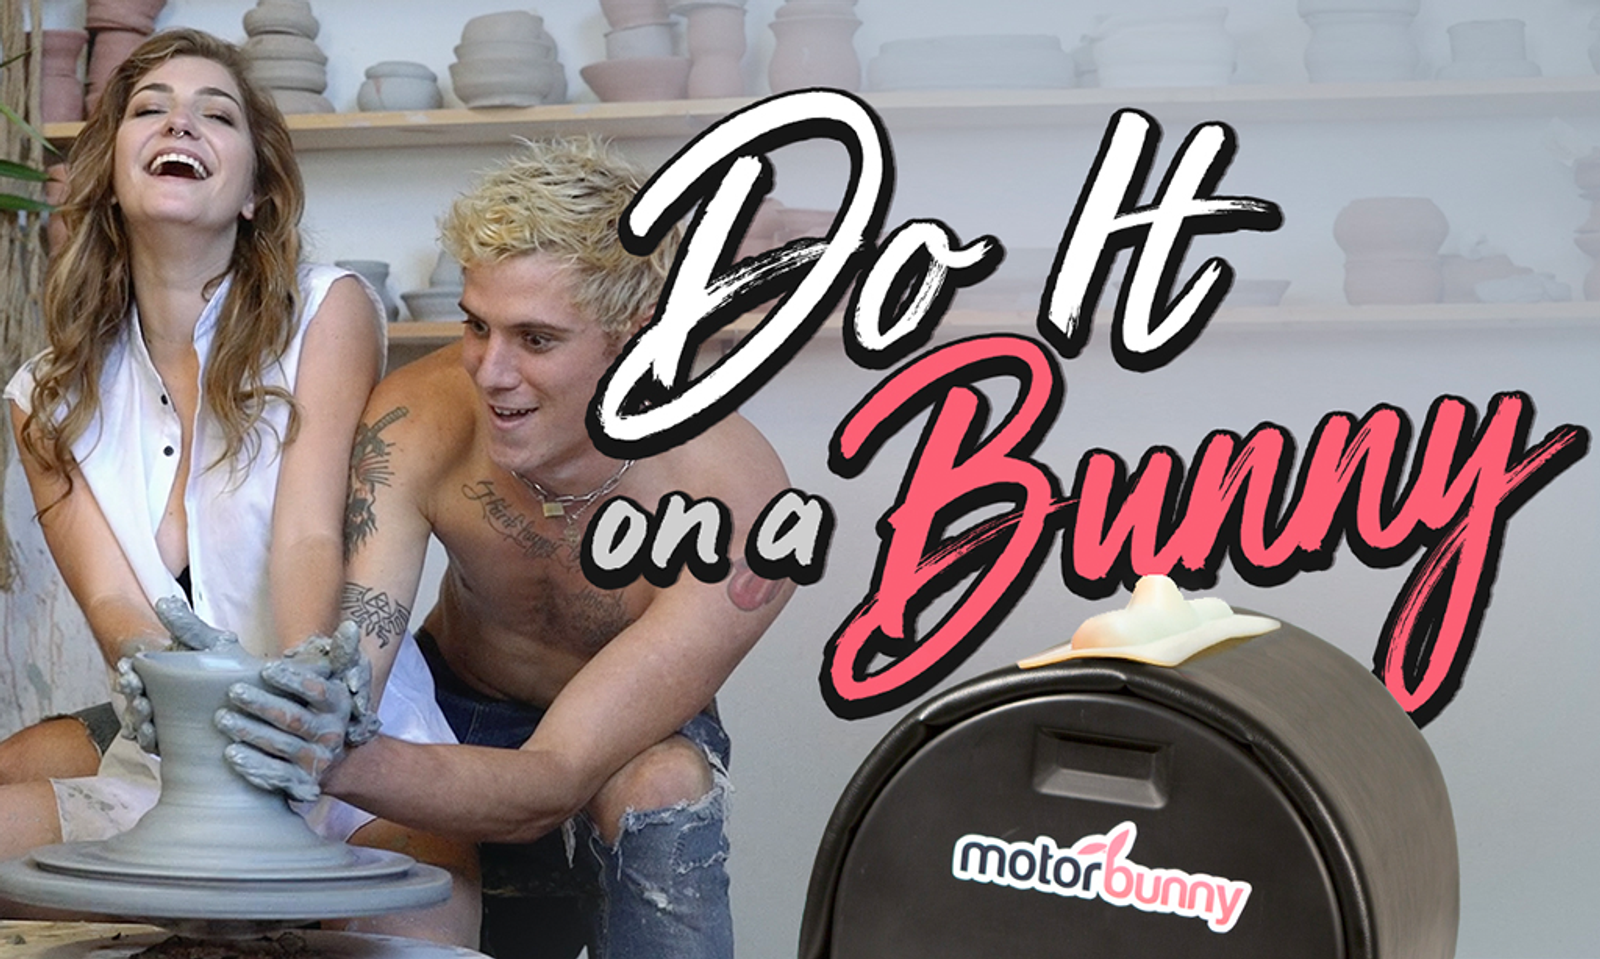 Motorbunny's ‘Do It On A Bunny’ YouTube Series Has Over 2.7M View